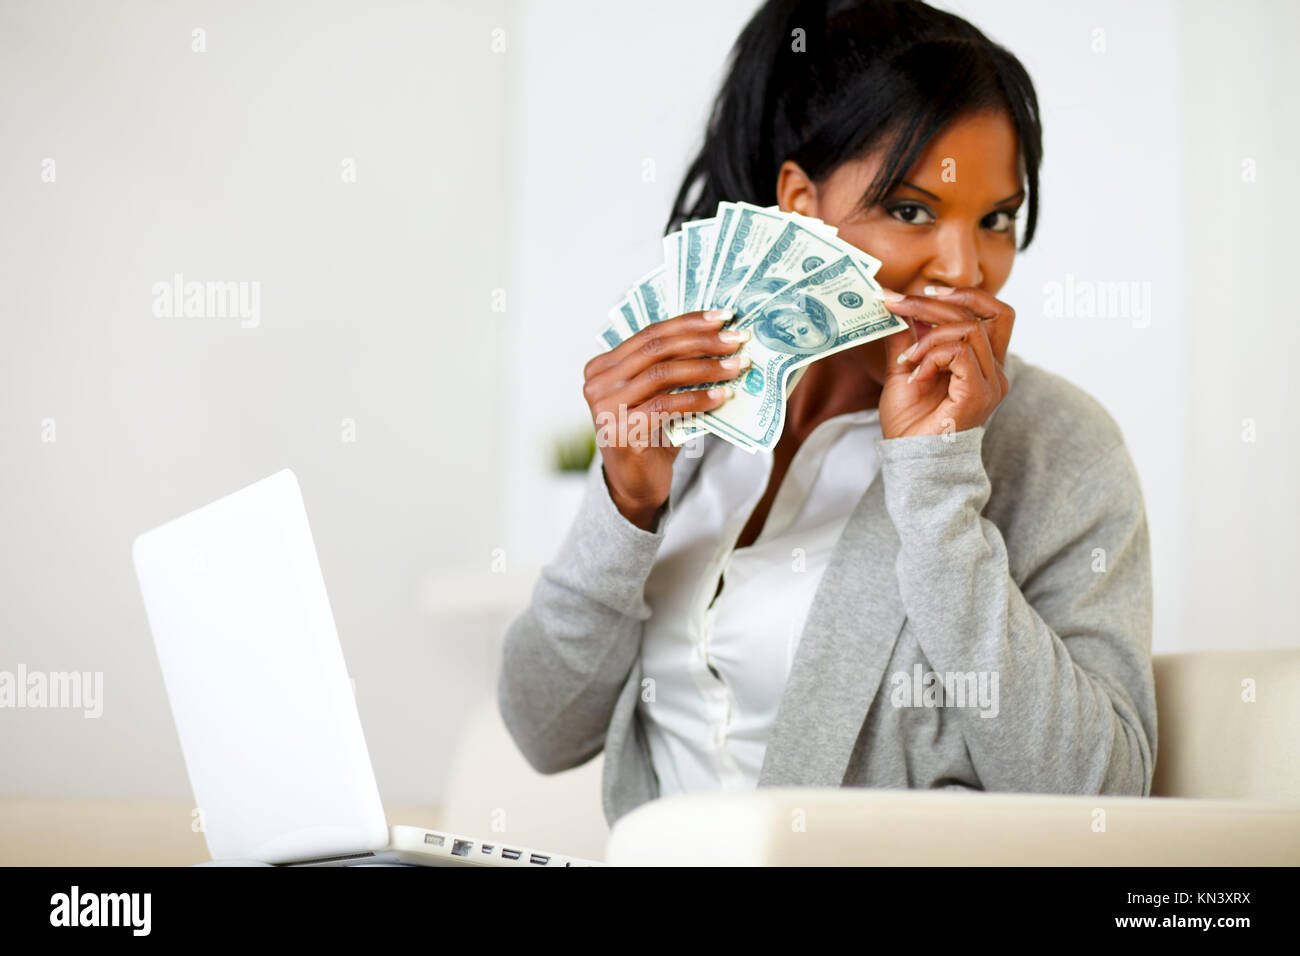 Portrait of an ambitious excited black woman with money. Stock Photo